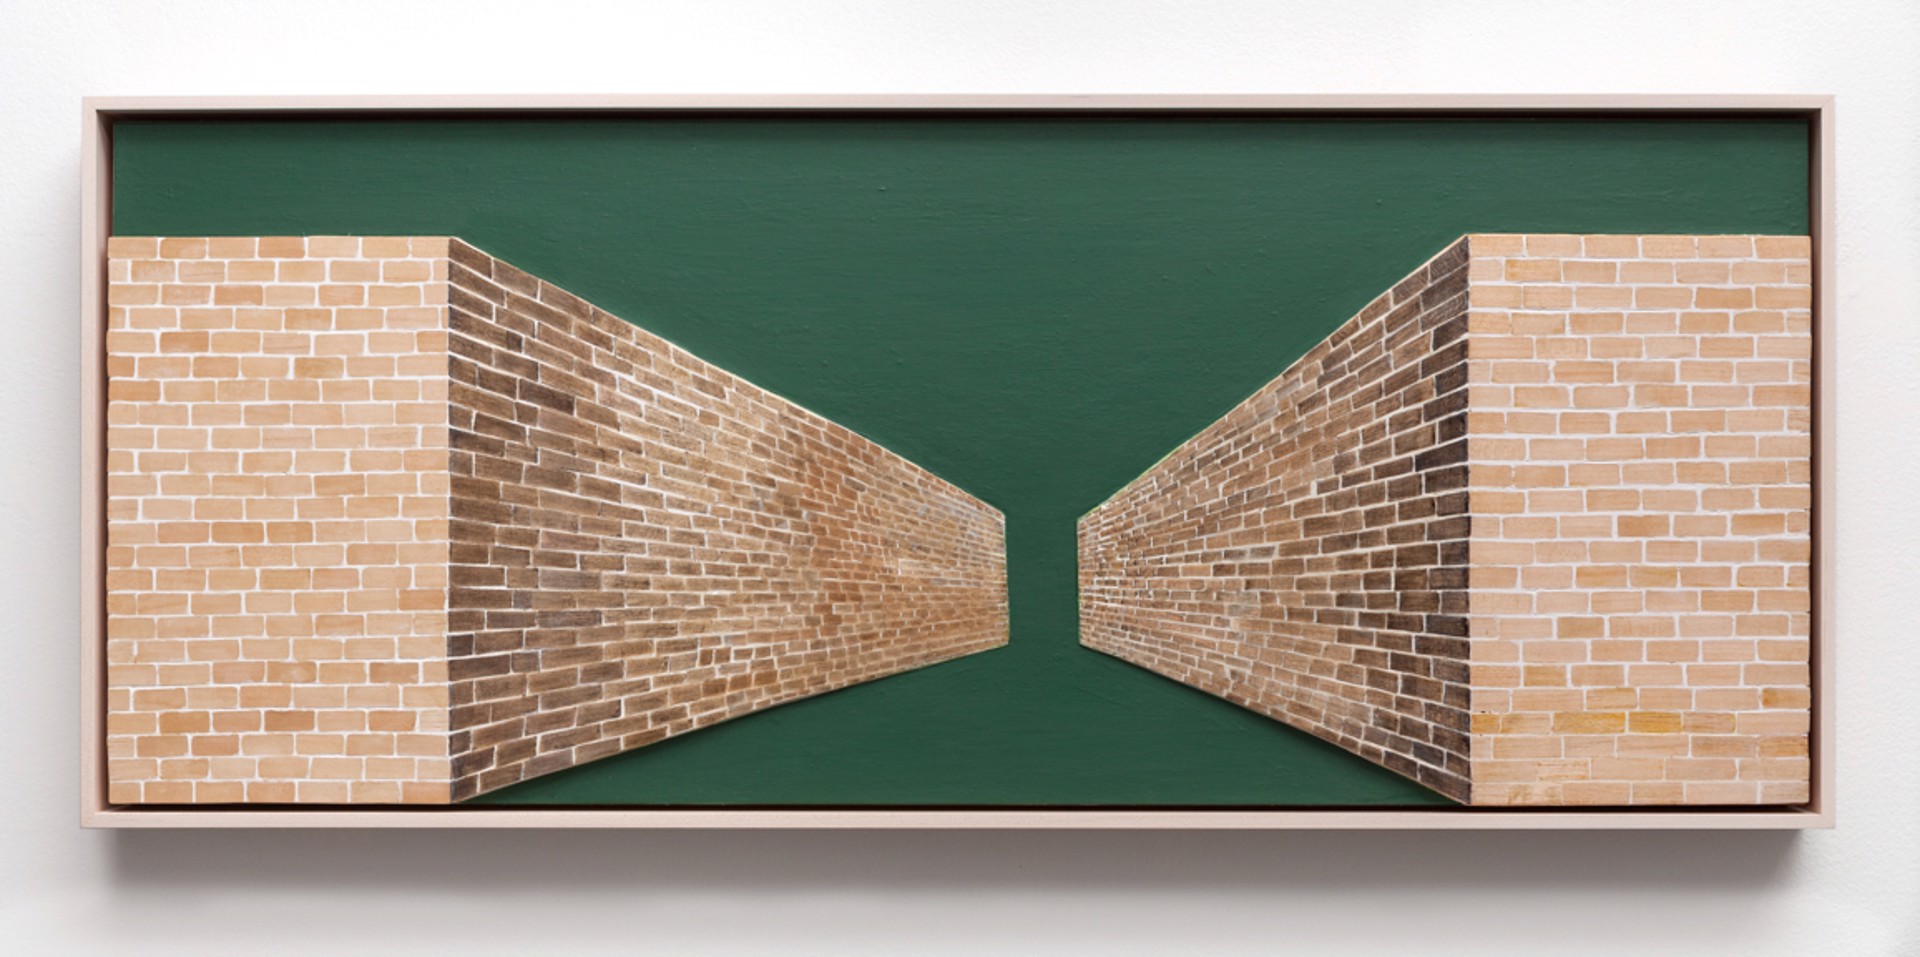 Two Brick Walls by Heejung Cho